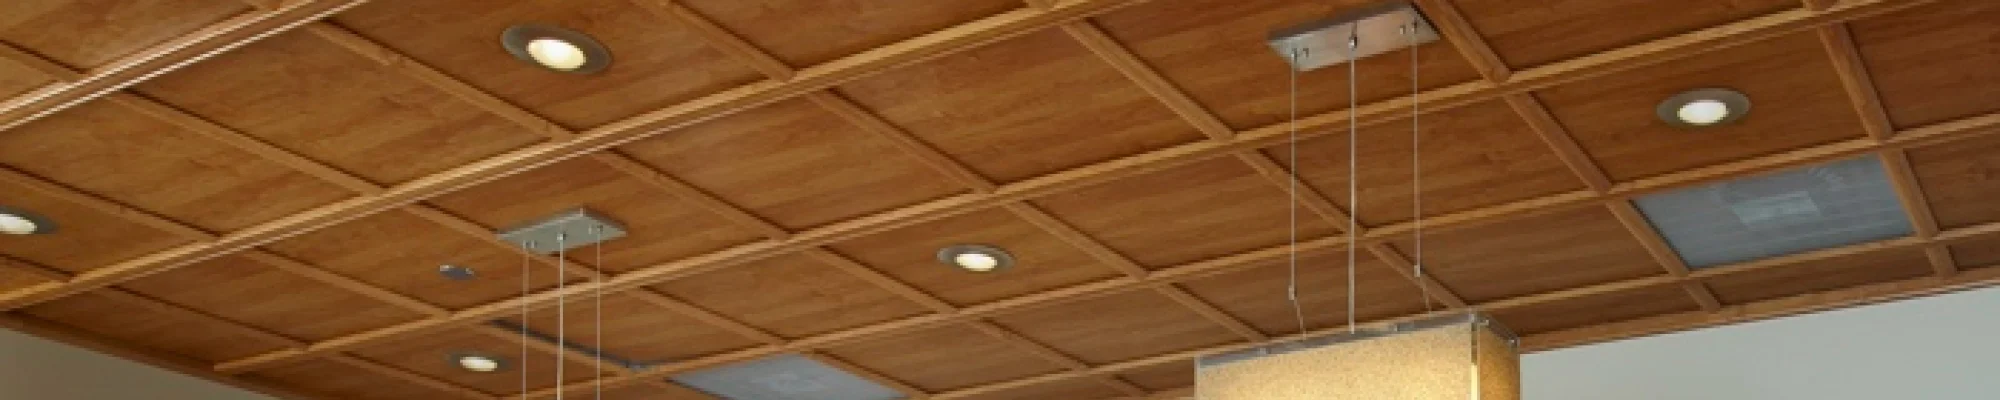 Shay's Carpet is proud to offer Sauder Ceiling Systems in the Toledo and Sylvania, OH areas